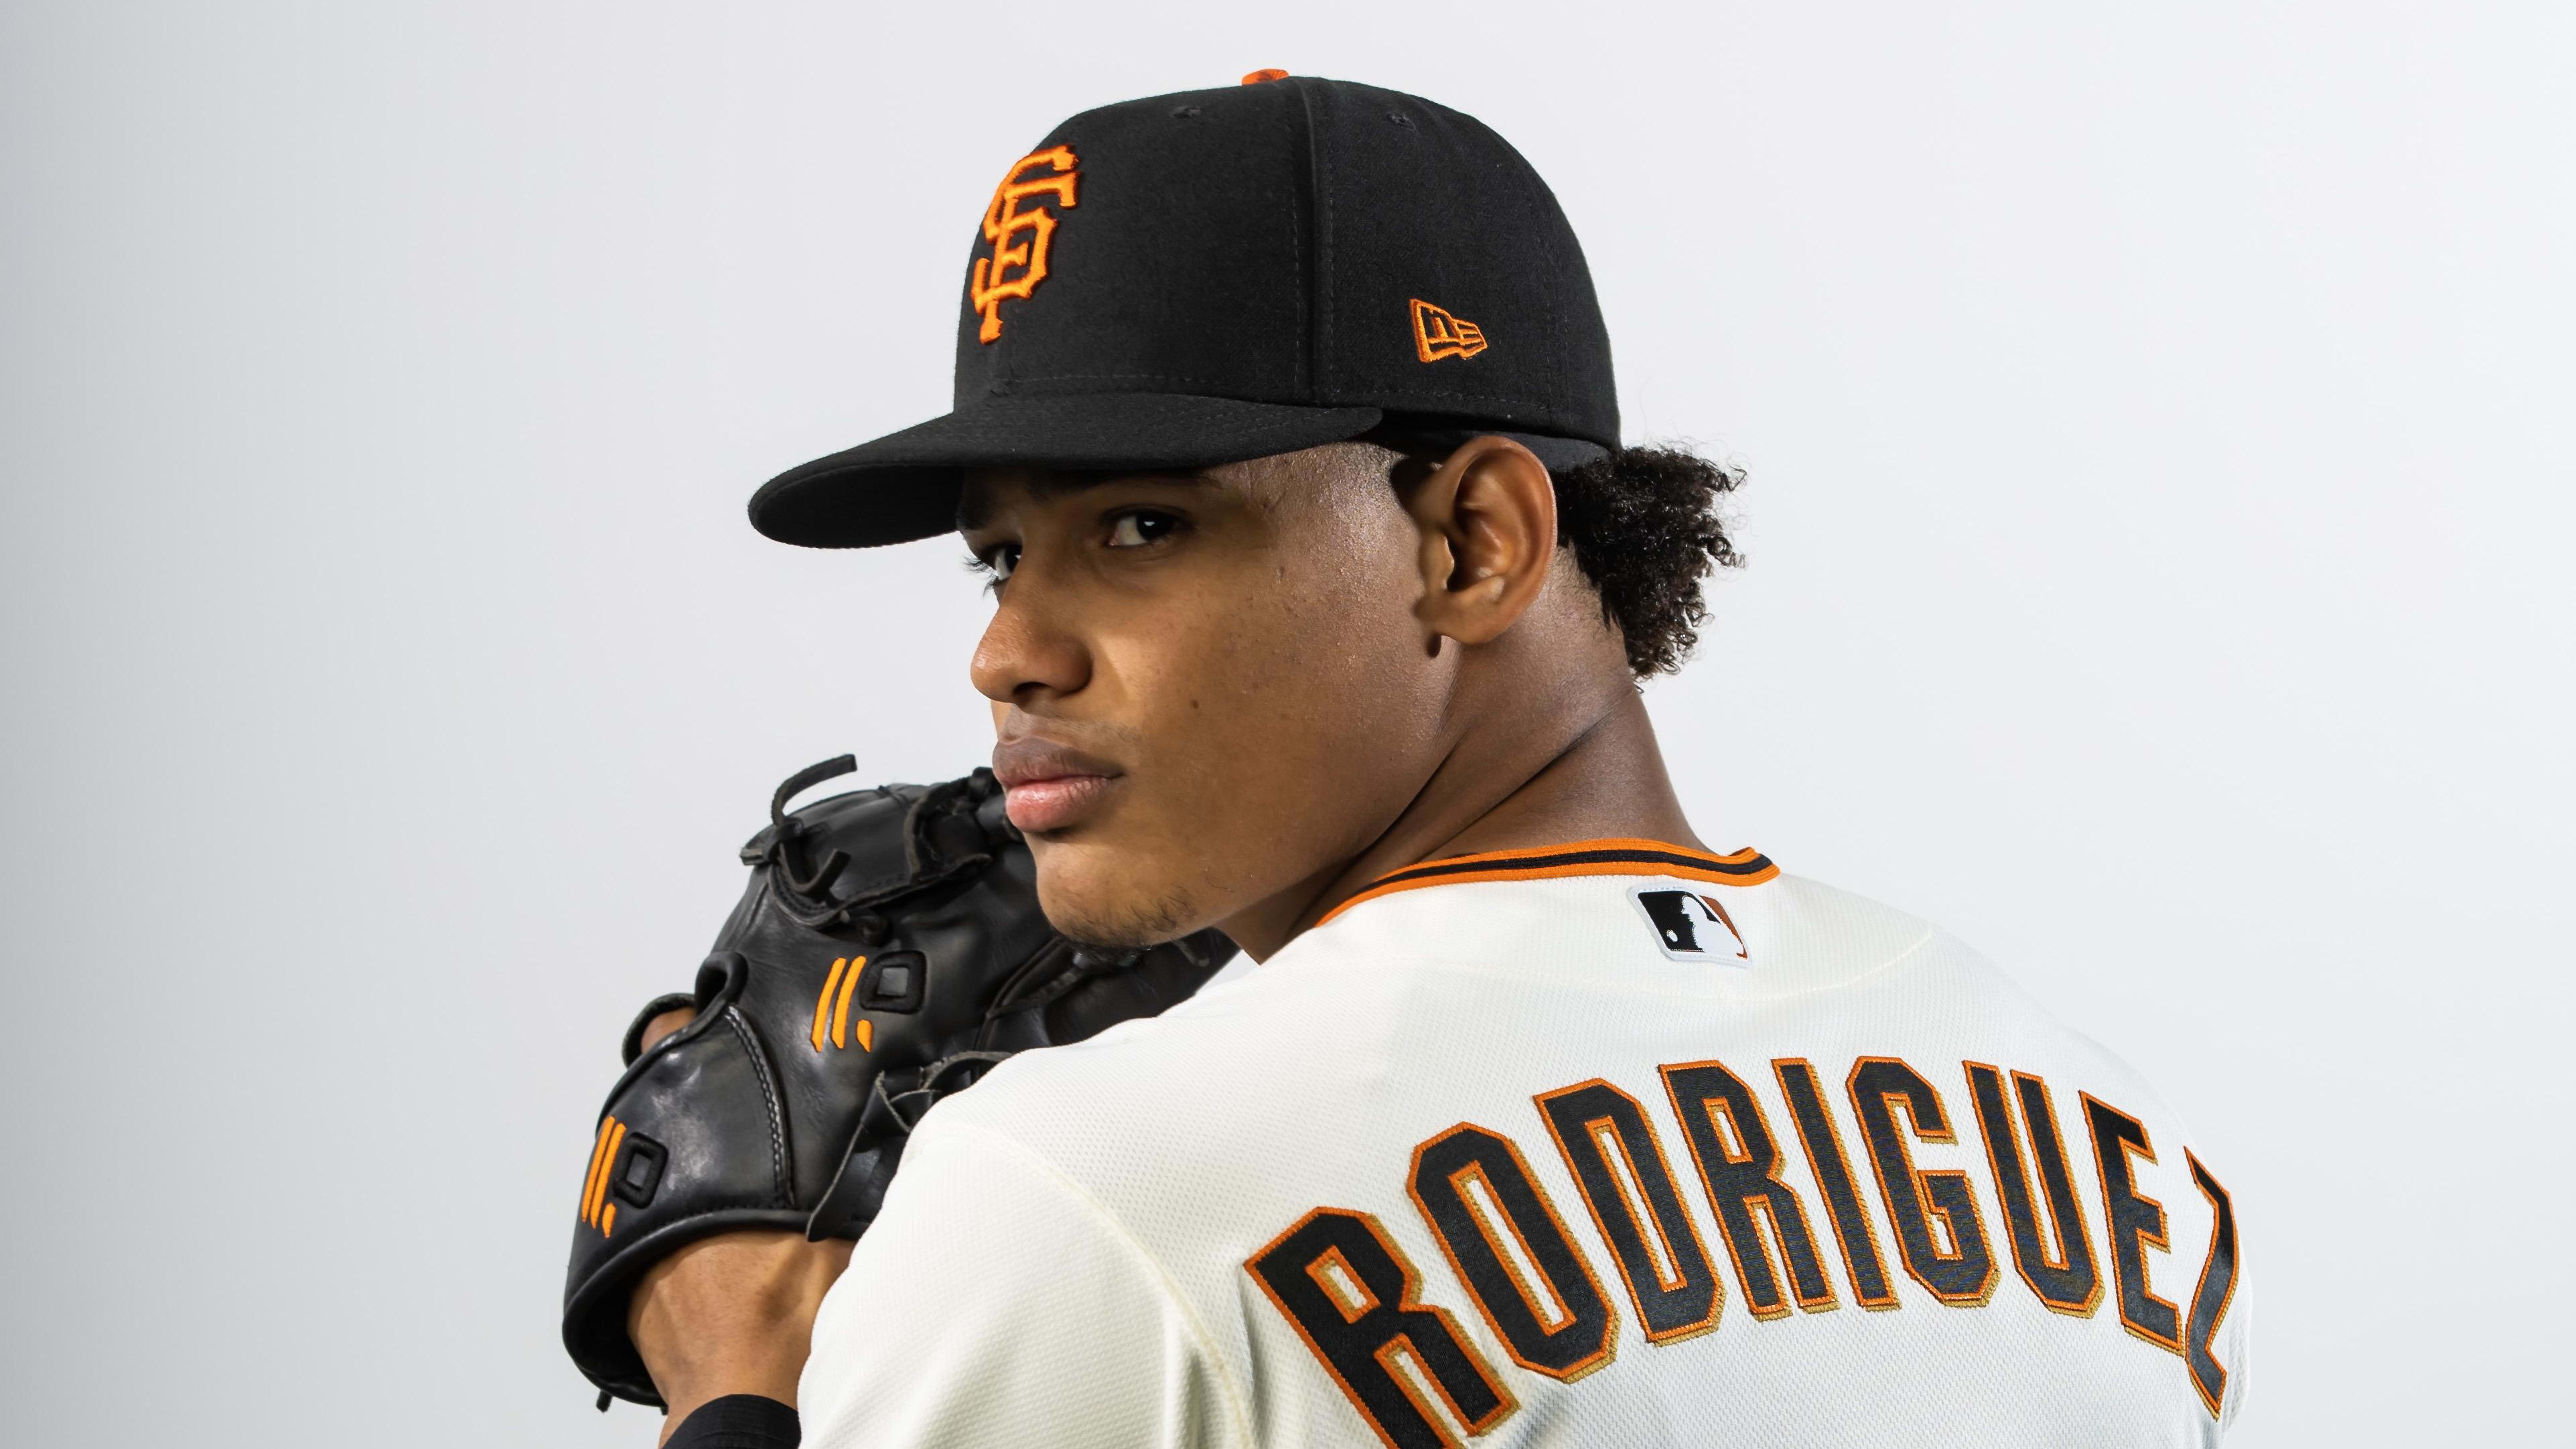 San Francisco Giants Call Up Reliever Randy Rodriguez to Make MLB Debut